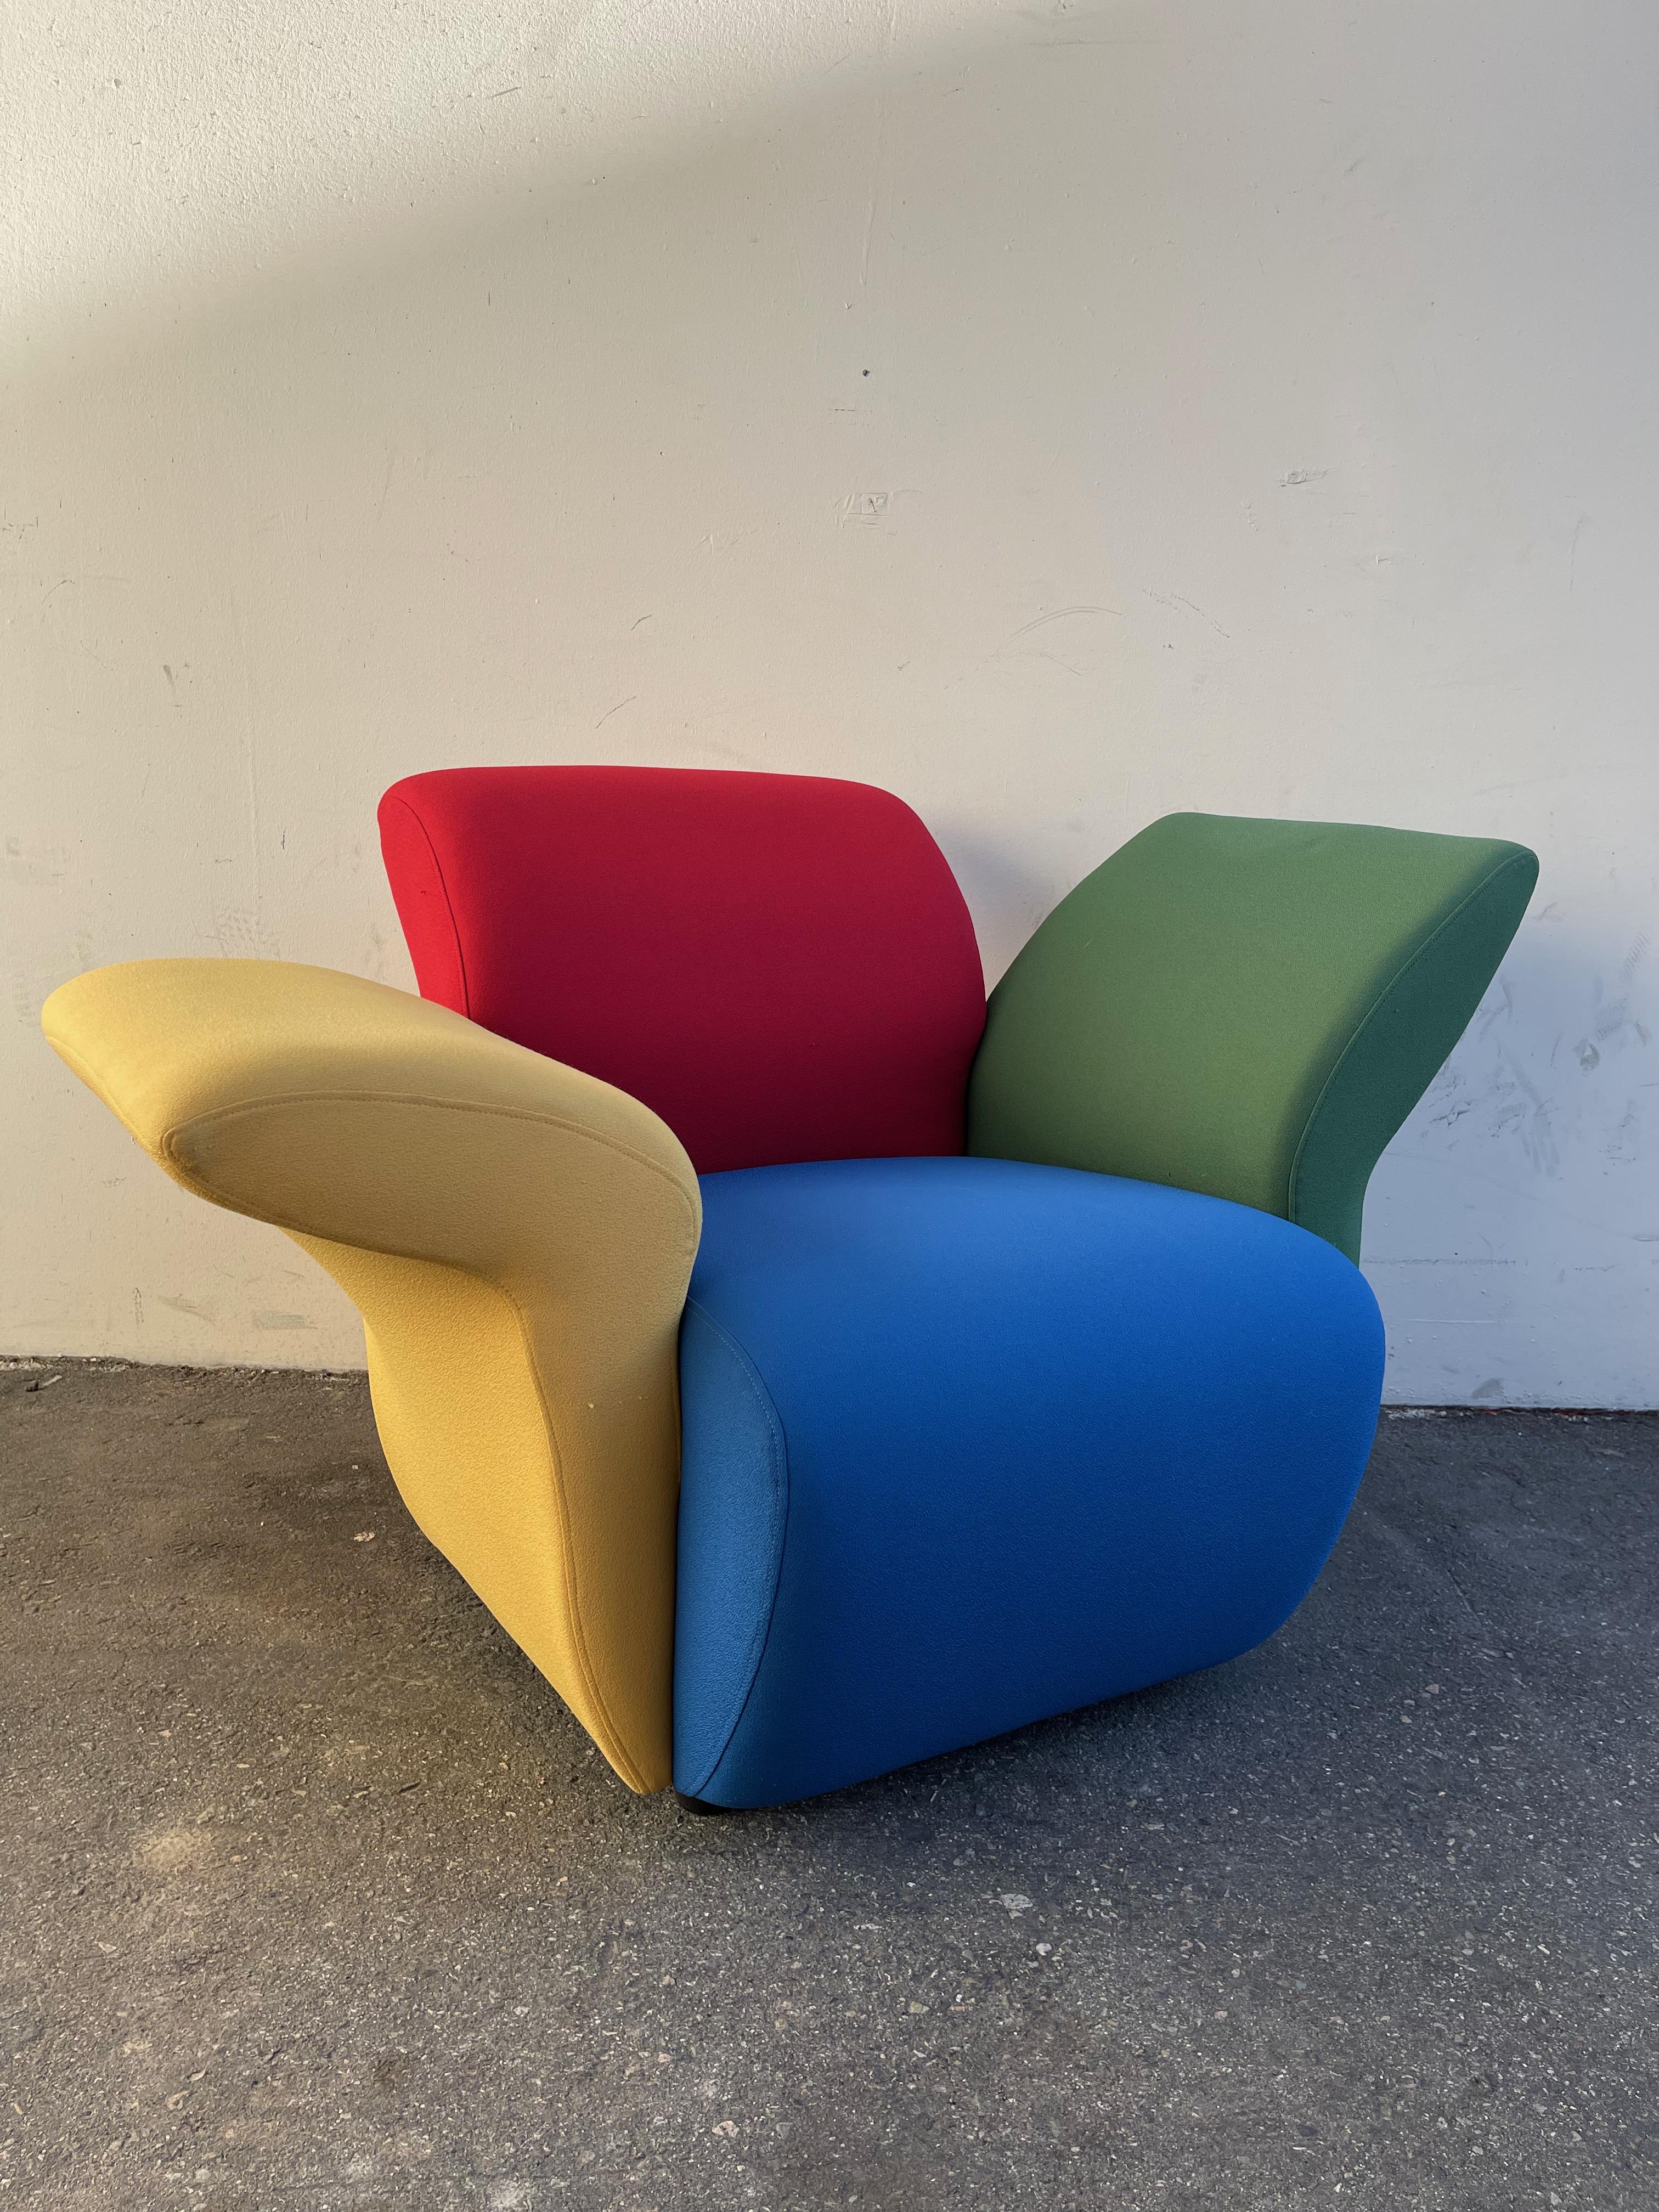 Postmodern Multicolor Lounge Chairs by David Burry, Montreal, 1980s In Good Condition For Sale In Vancouver, BC